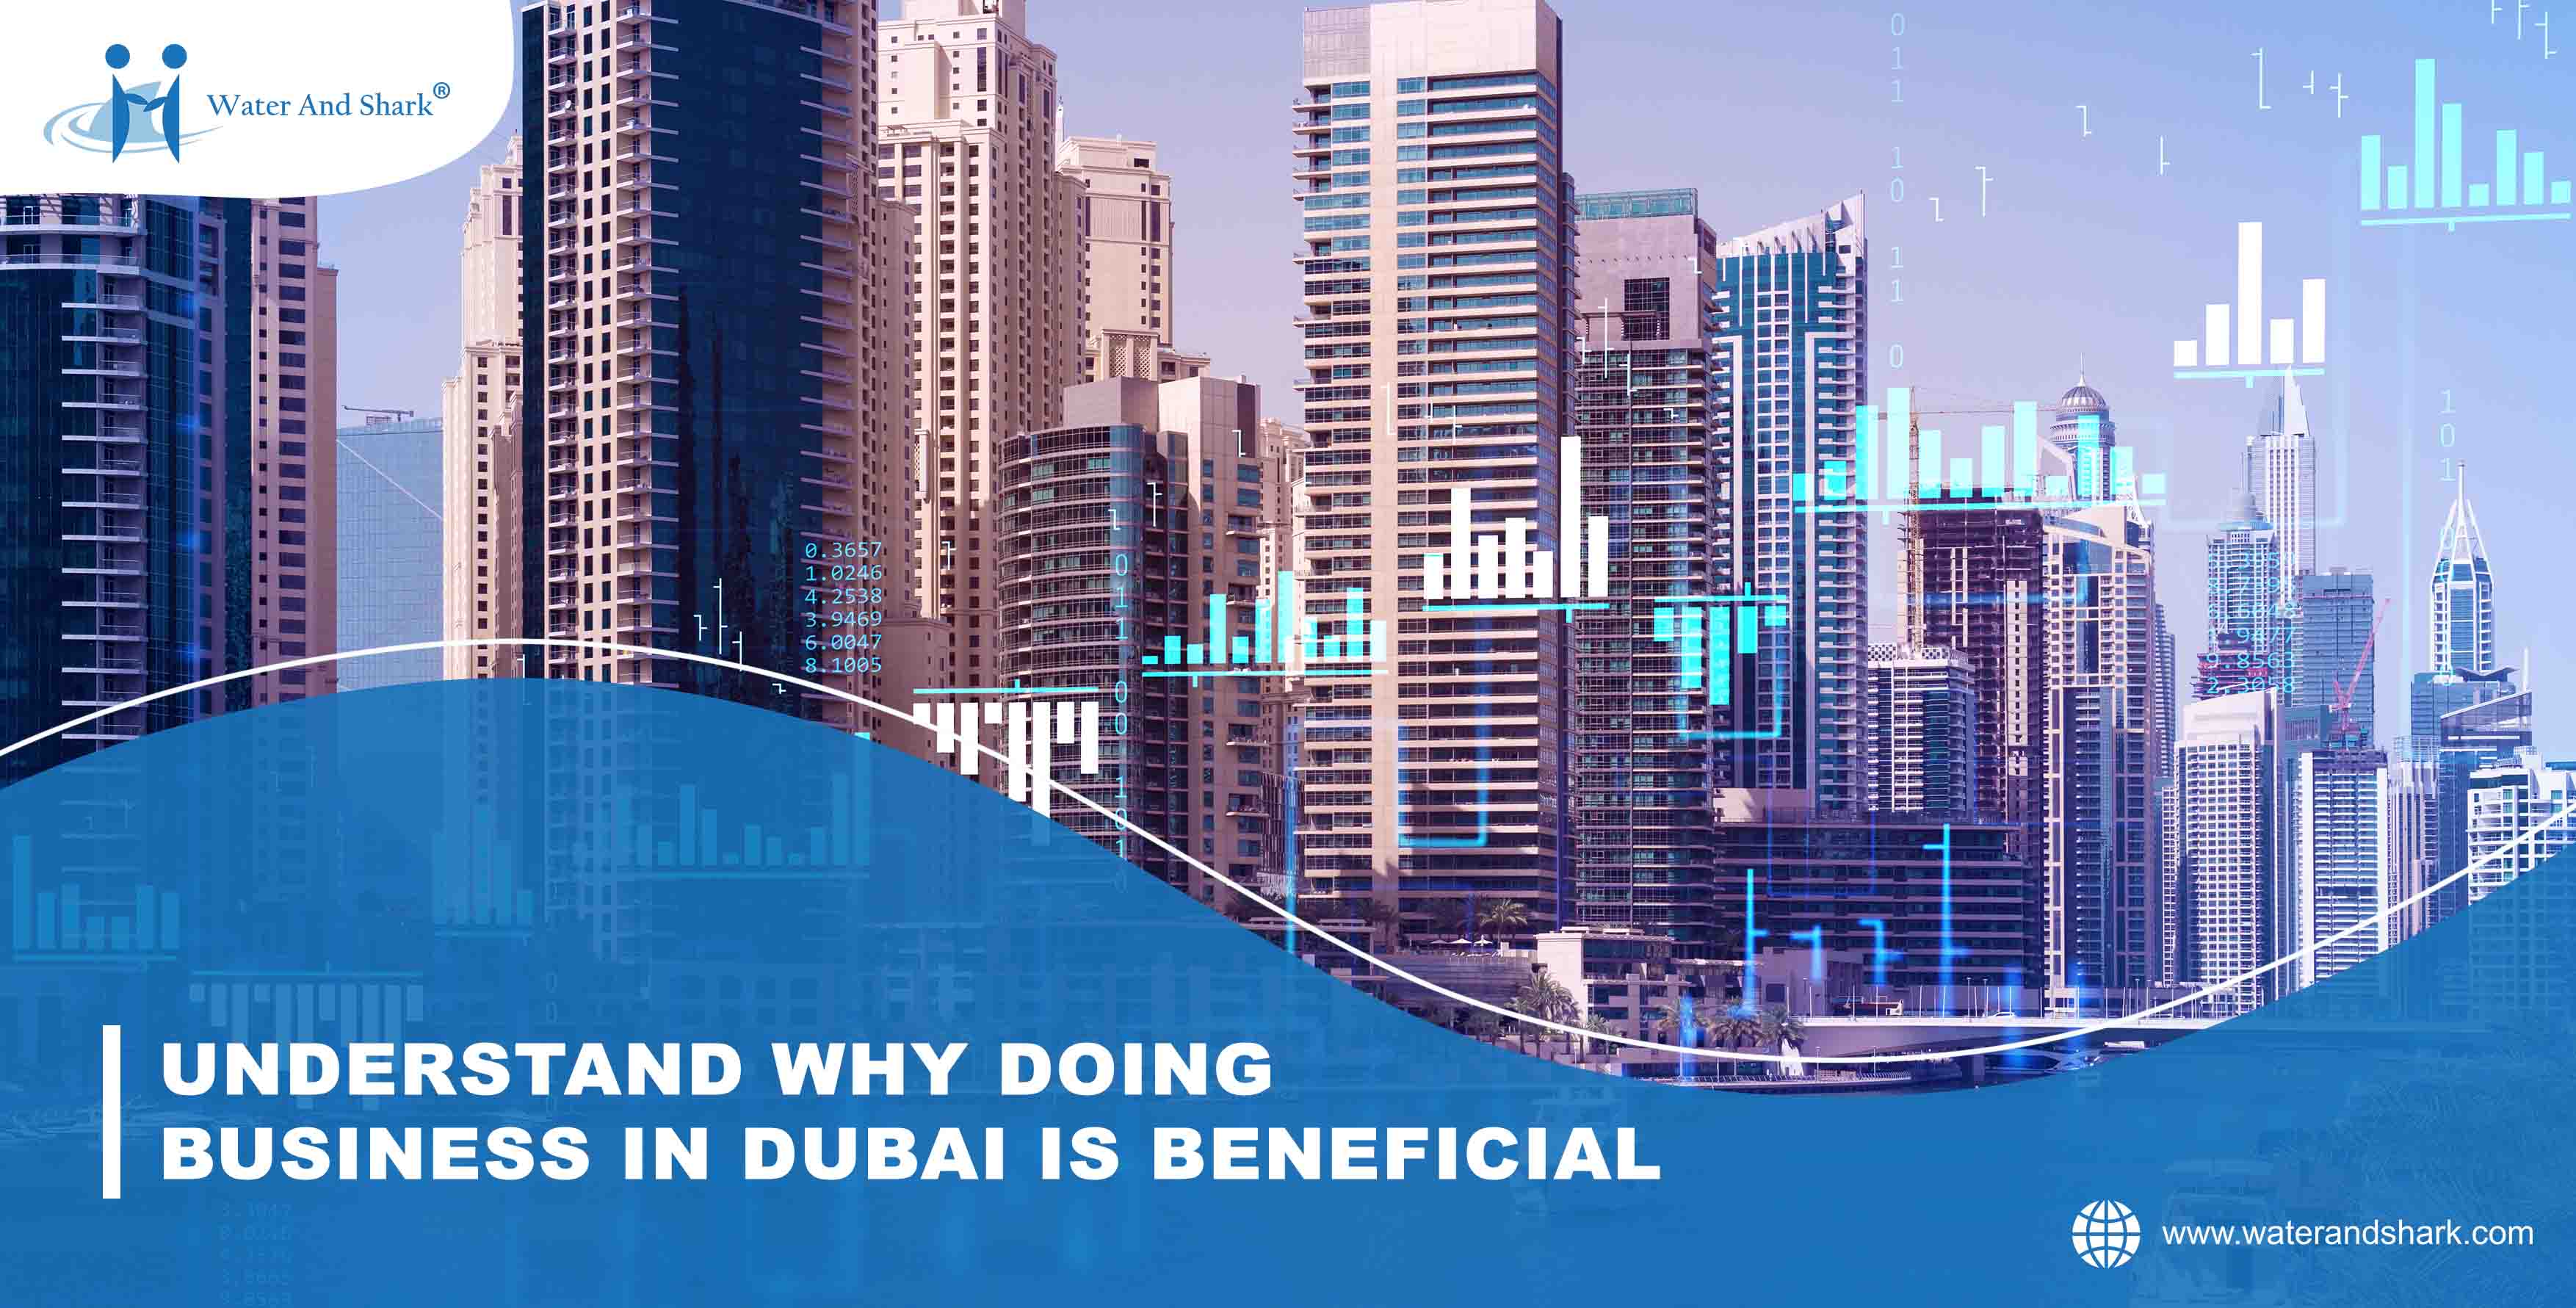 650x1280_UNDERSTAND_WHY_DOING_BUSINESS_IN_DUBAI_IS_BENEFICIALloe_size.jpg